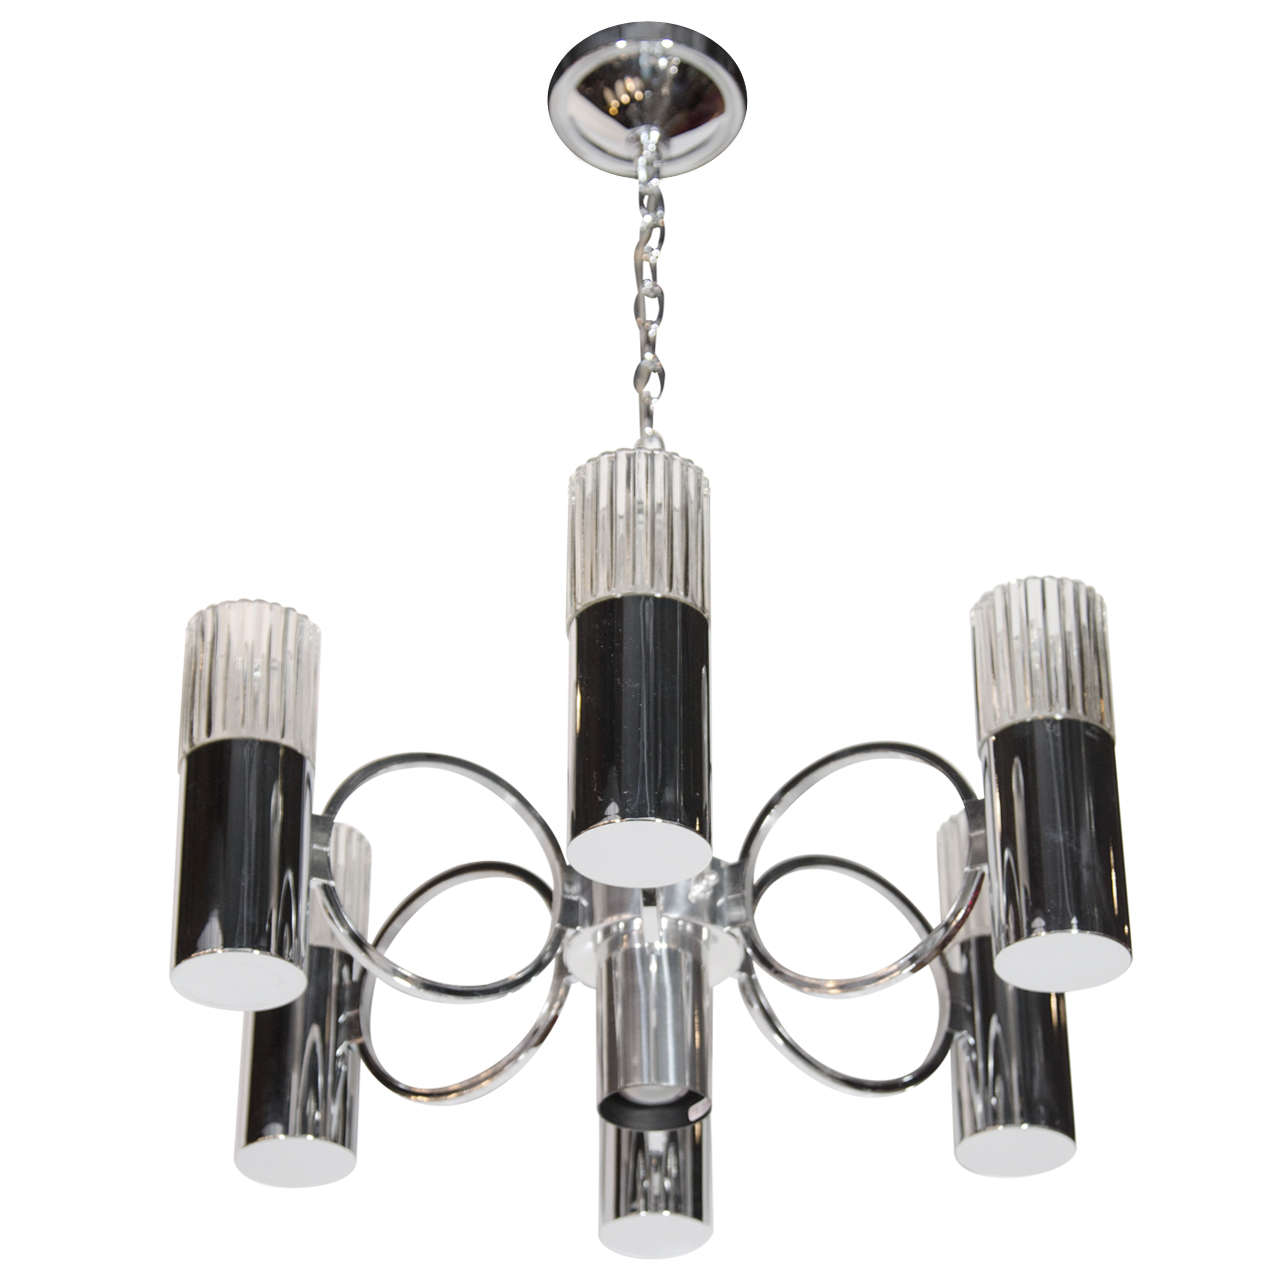 Sophisticated Mid-Century Chrome & Glass Chandelier by Sciolari